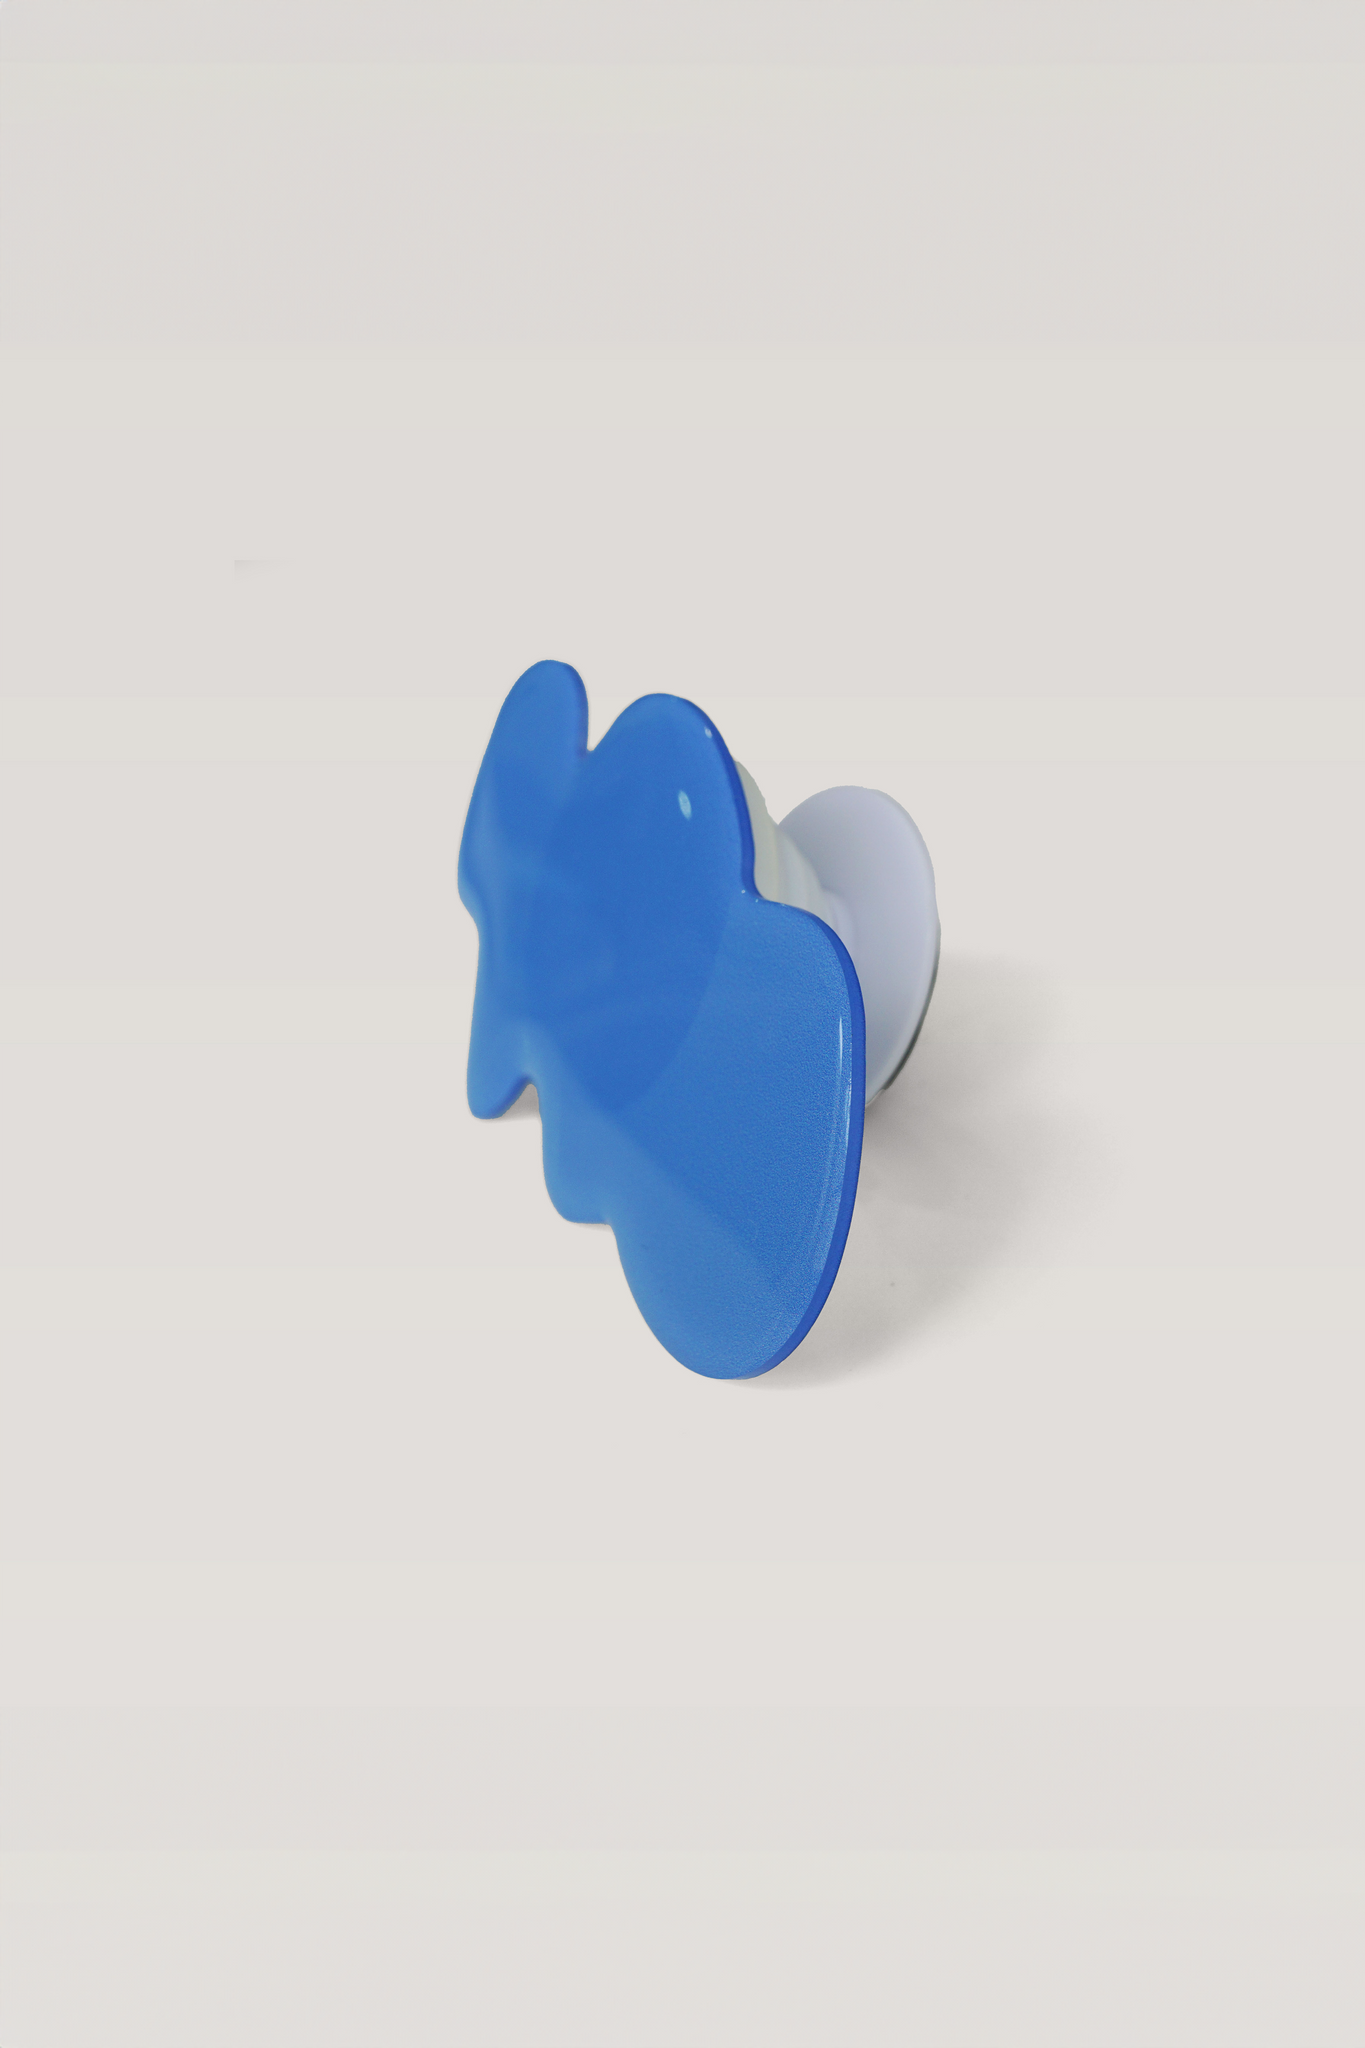 Blue Squiggle Phone Grip